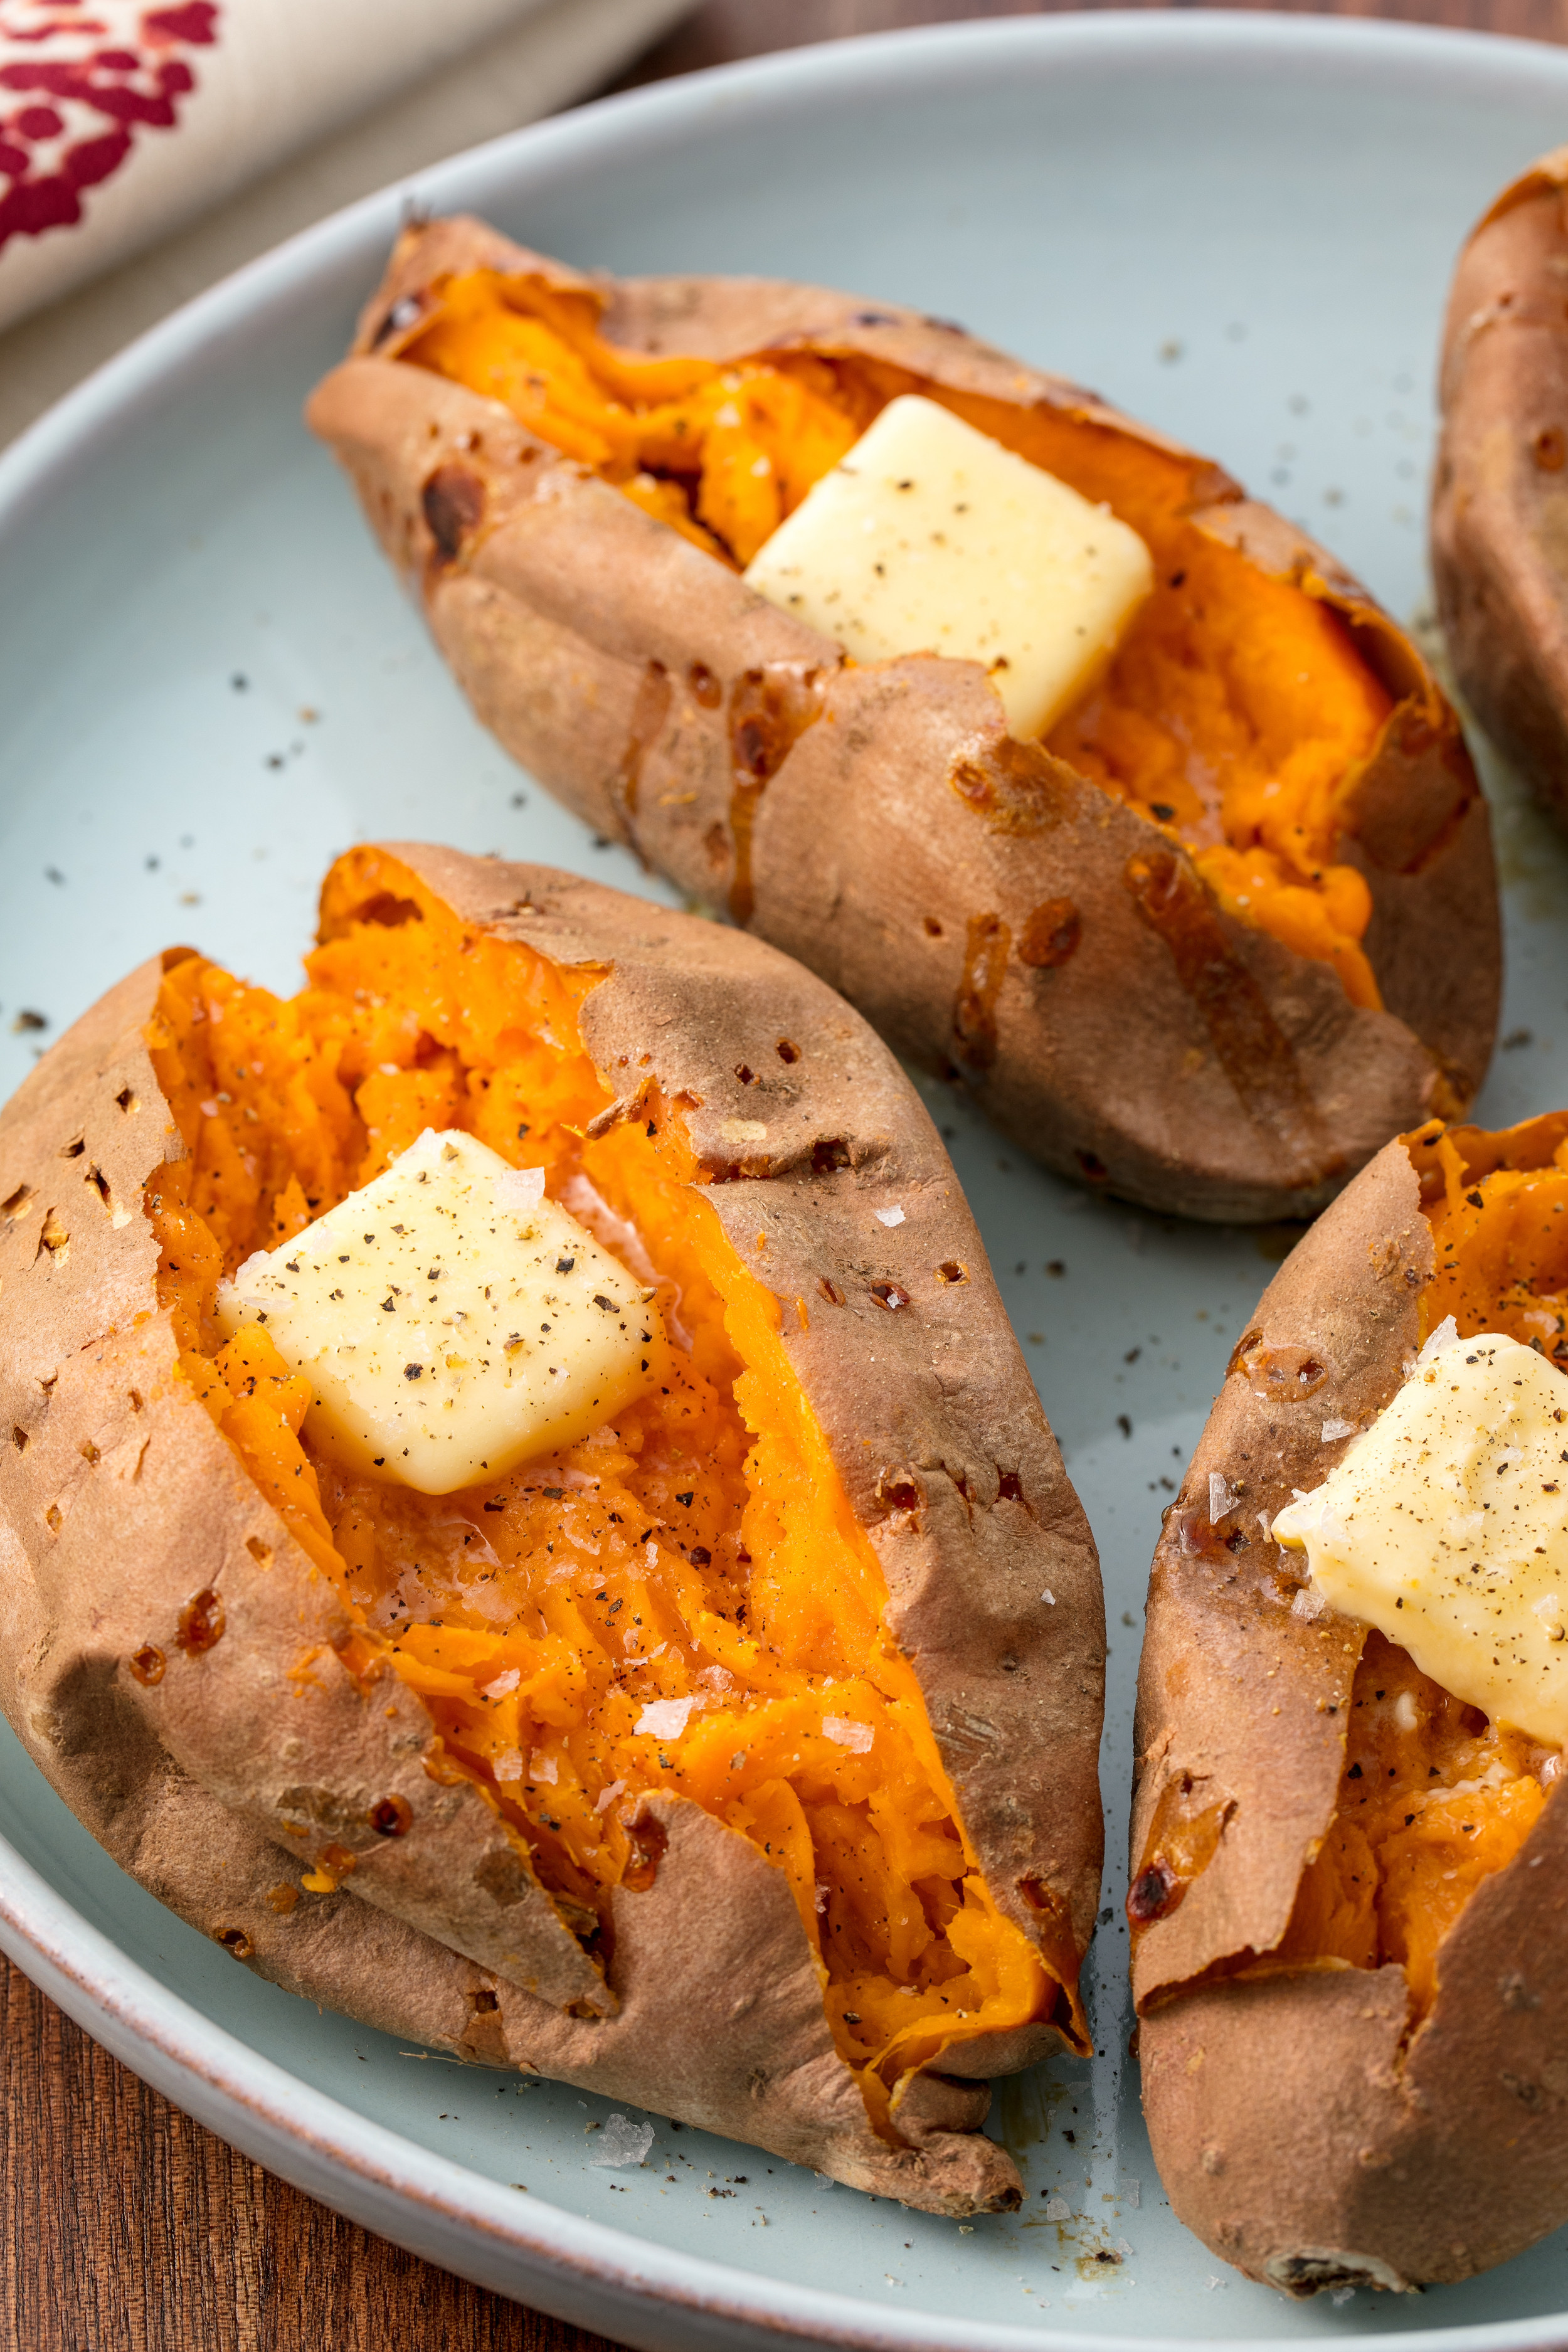 How To Make A Sweet Potato
 30 Best Baked Potato Recipes Fully Loaded Baked